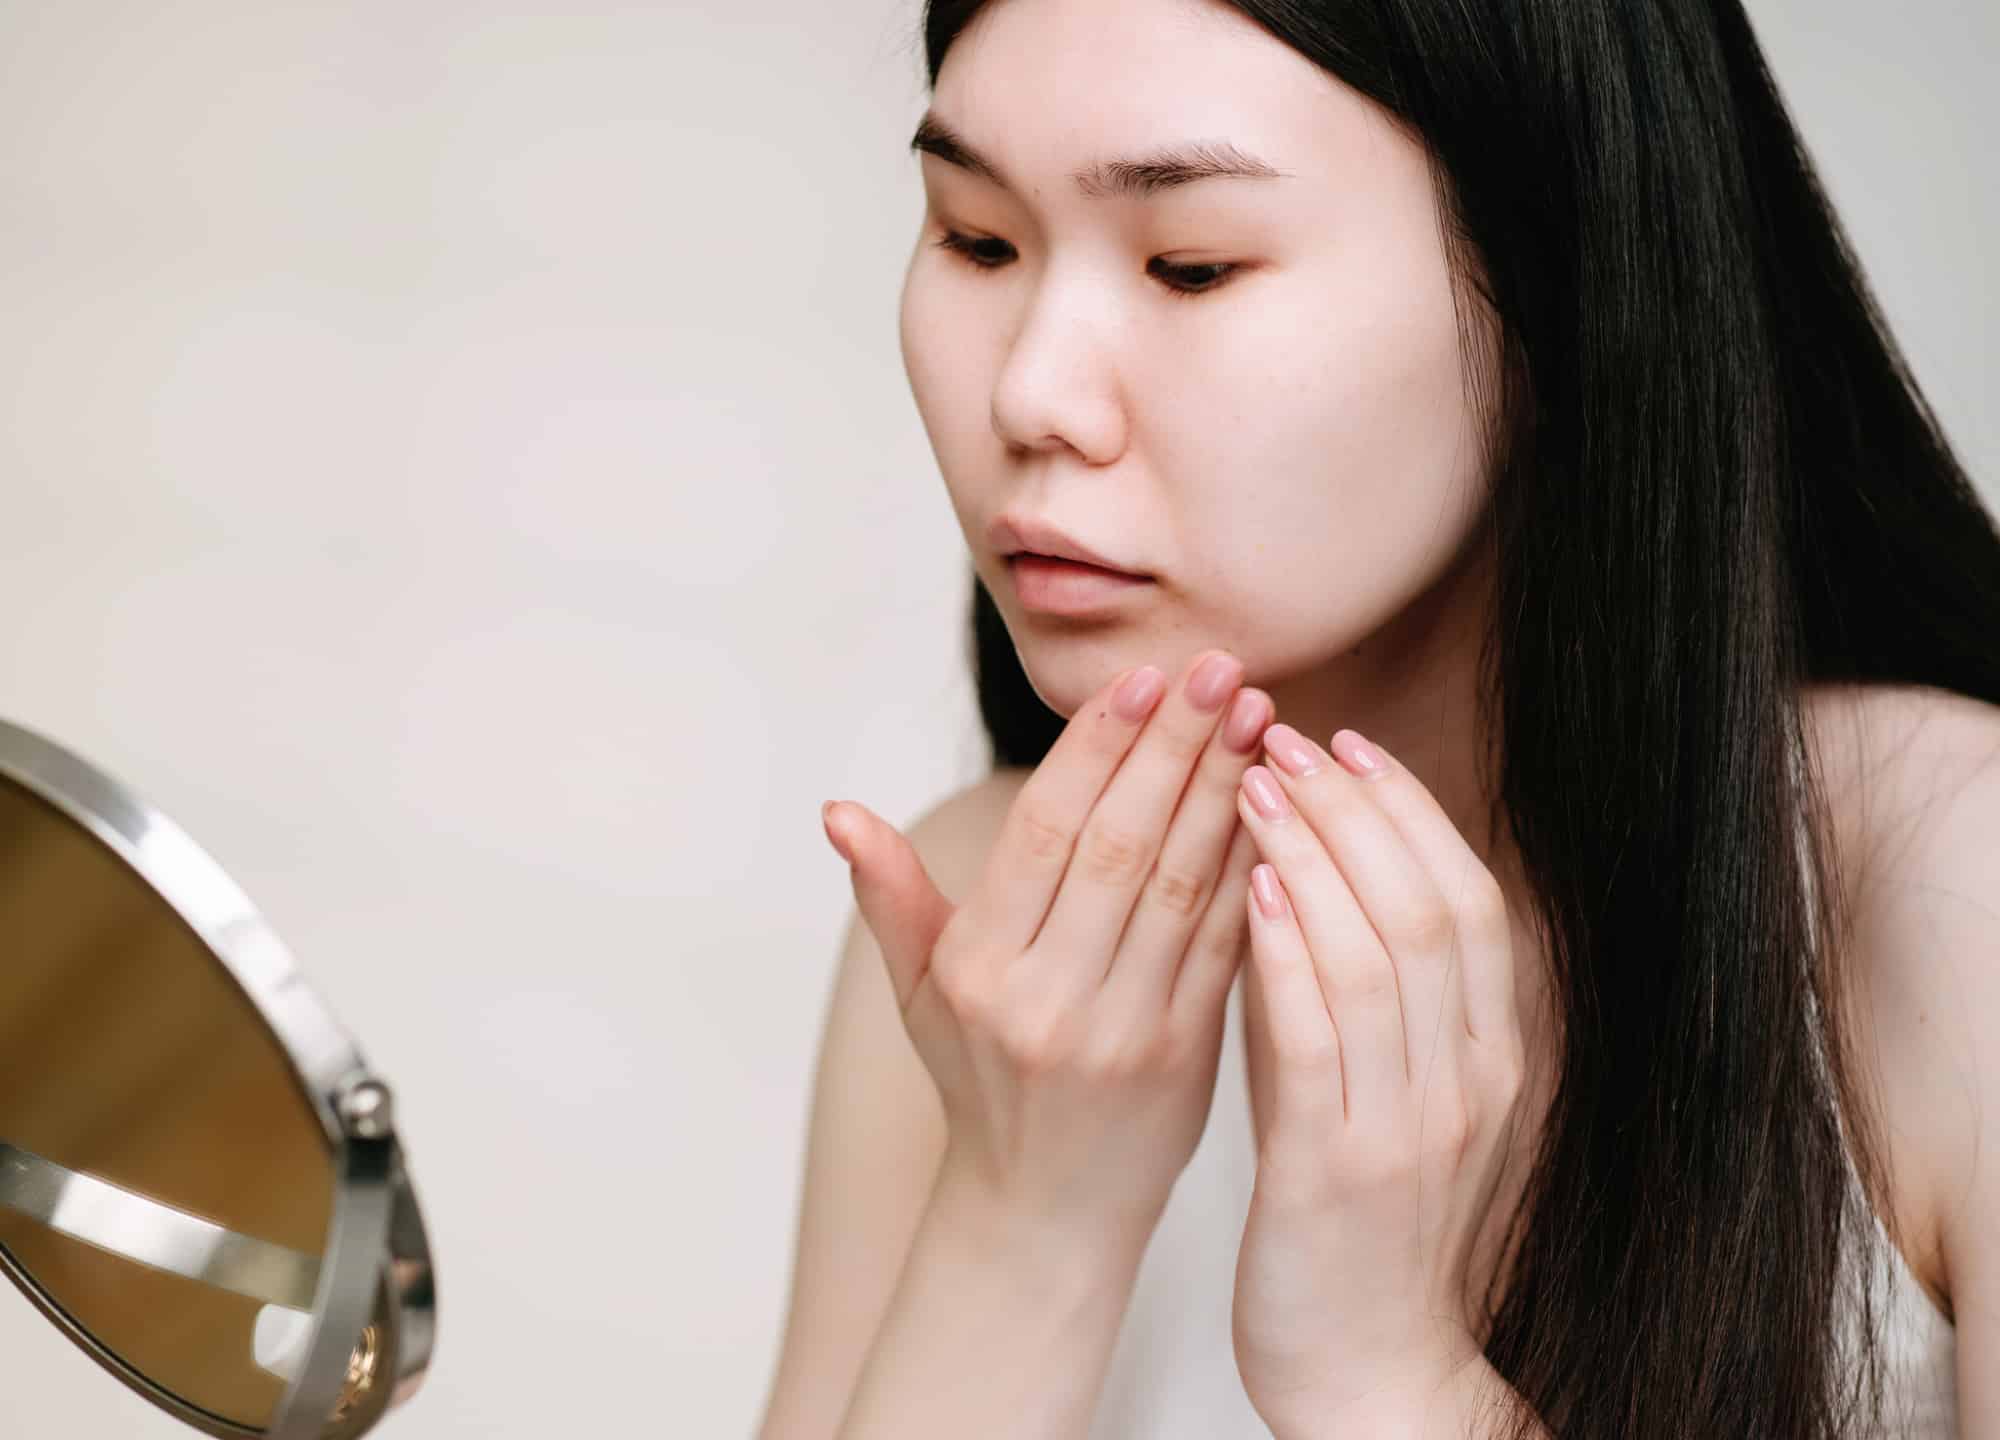 Dermatologists weigh on on top skin irritants